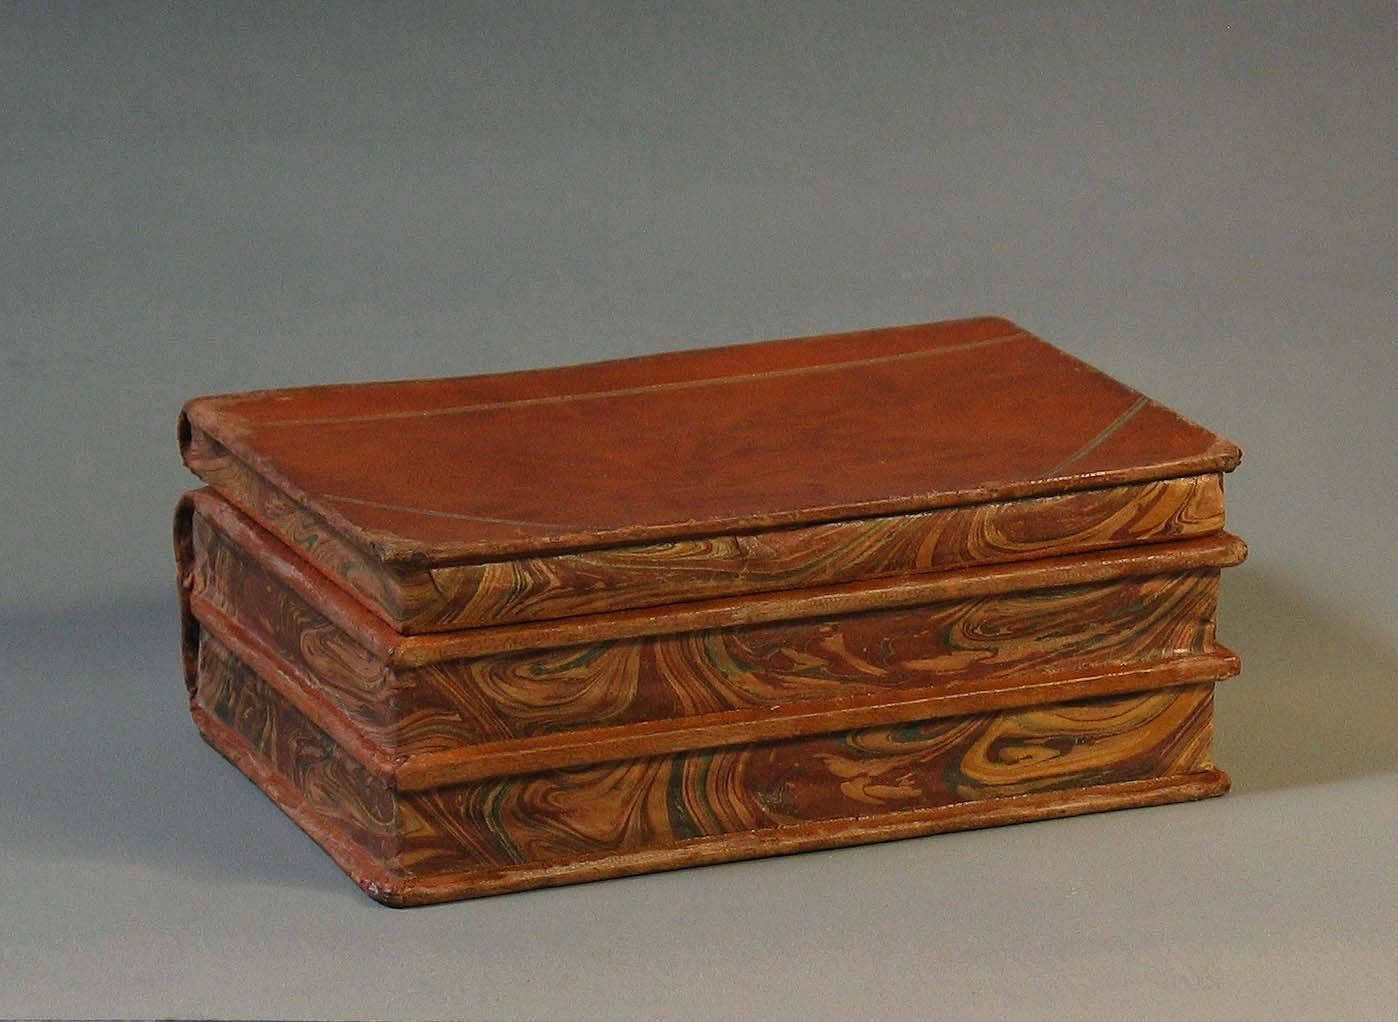 Hand-Crafted Antique Leather Book Form Box with Fitted Cigarette or Cigar Dispenser